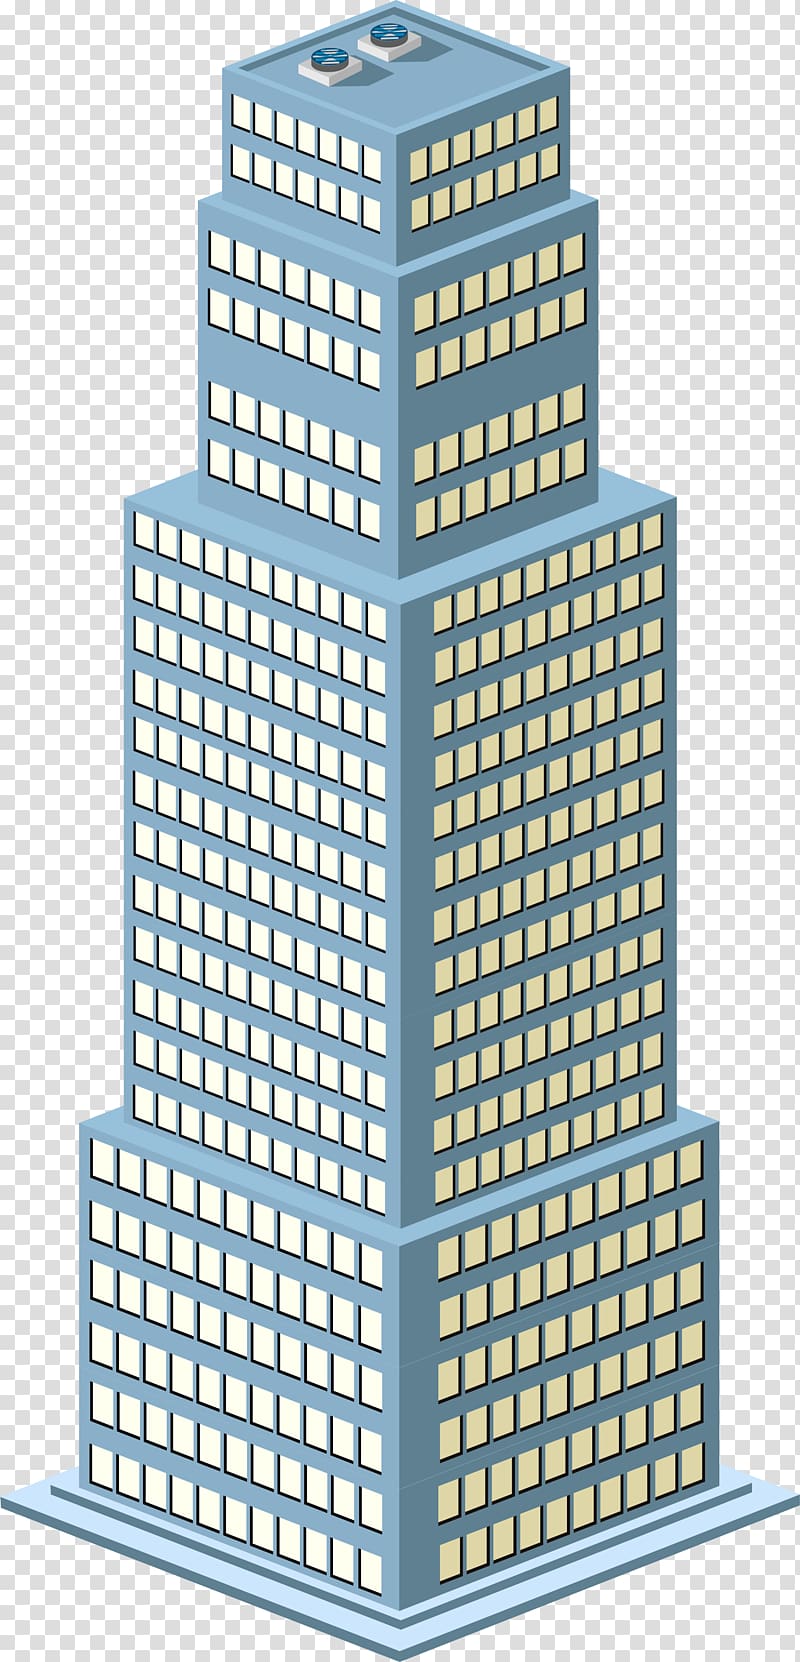 grey tower illustration, Building Office, House building materials transparent background PNG clipart